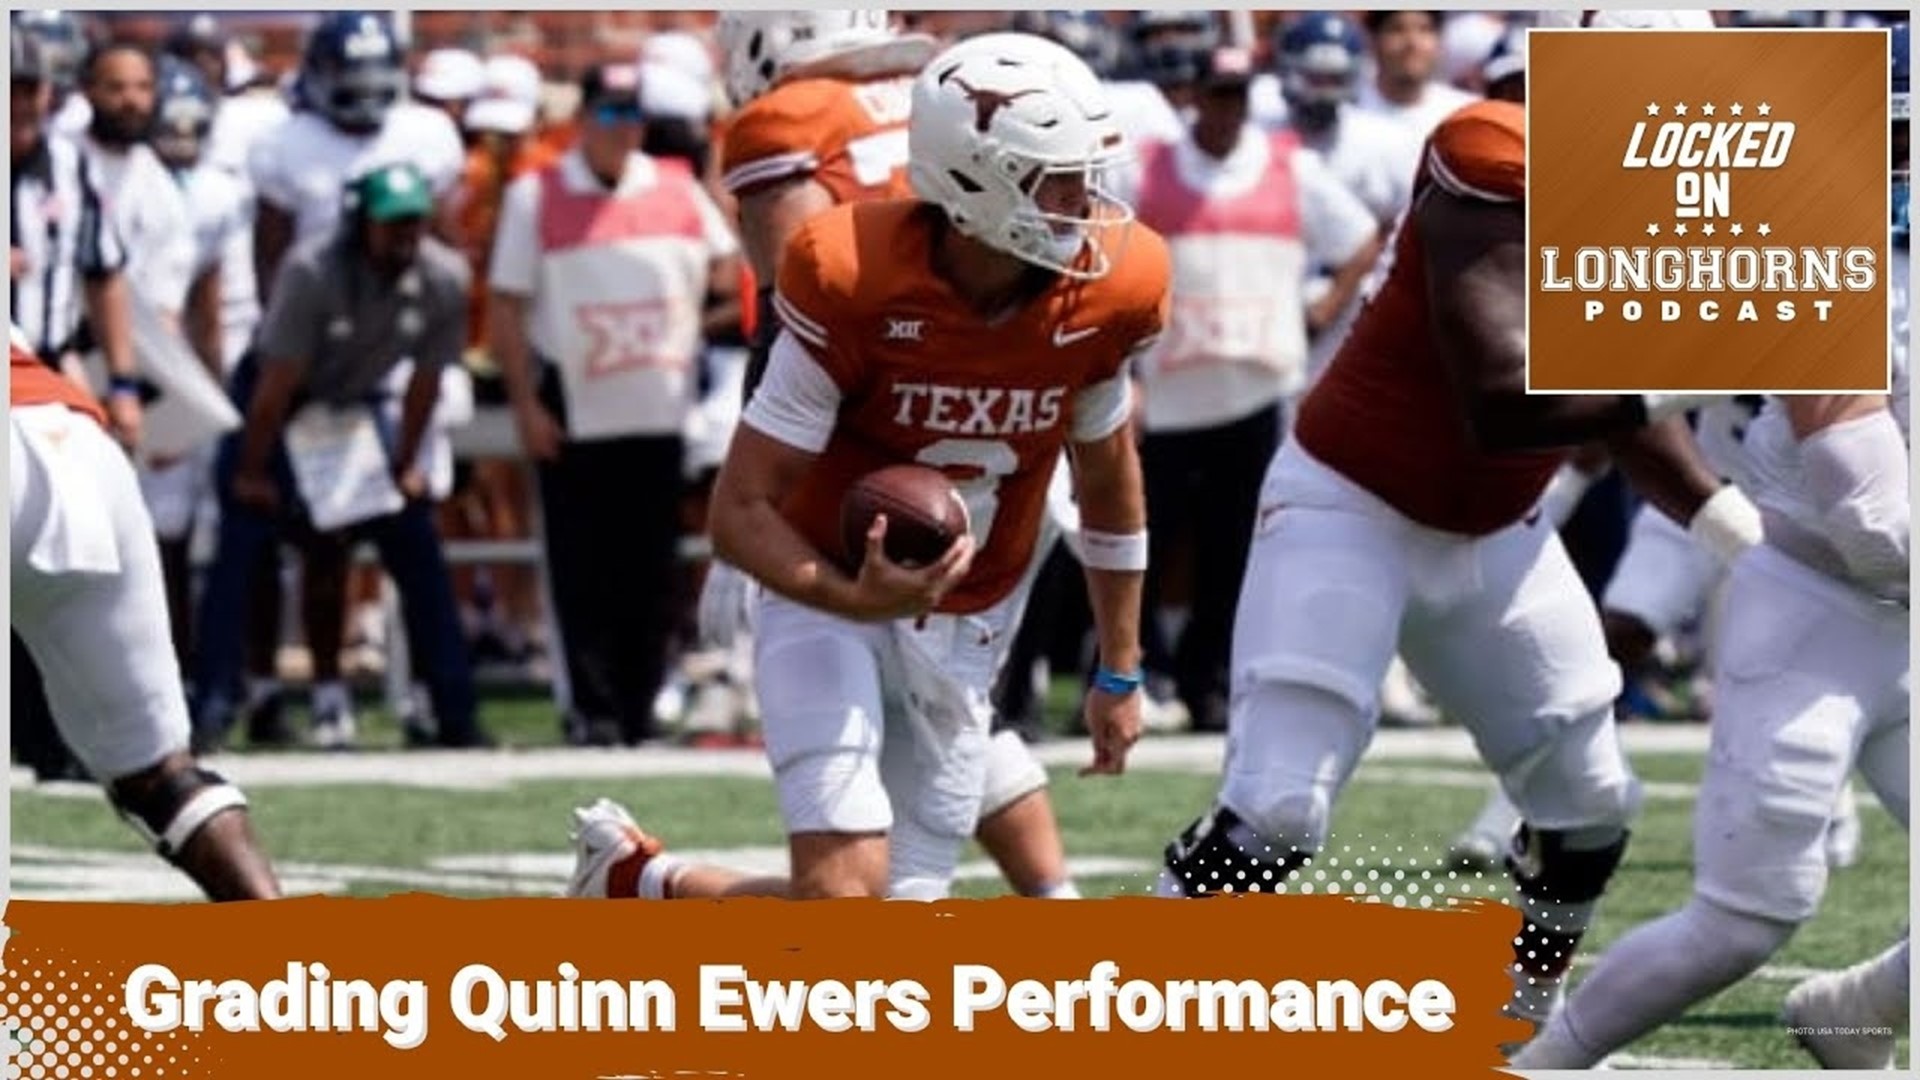 Quinn has been good, but it is fair to expect more from somebody who was touted on the same level as Vince Young. How would you grade his performance from Saturday?